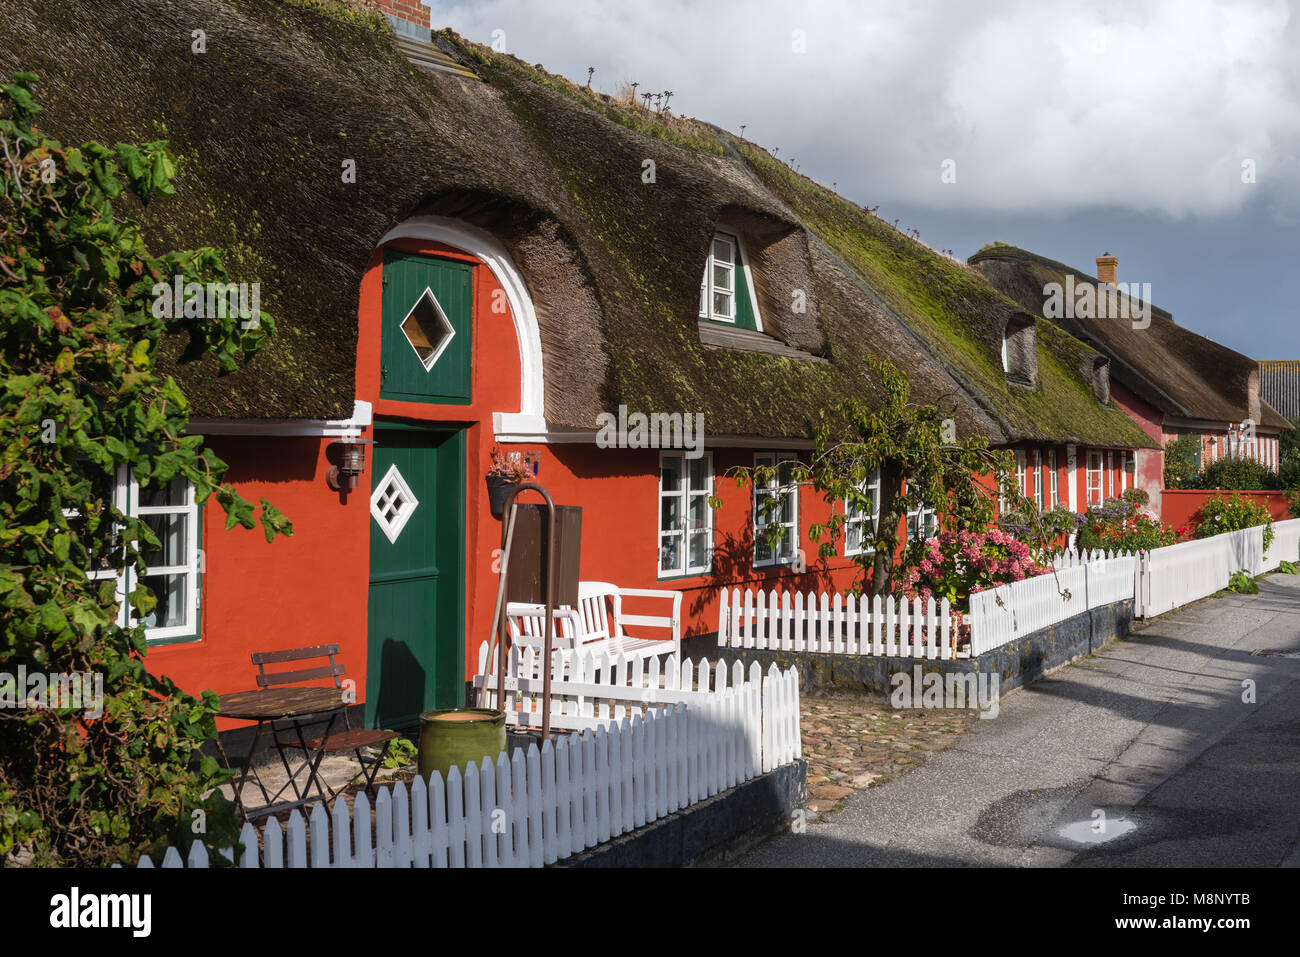 Row of red painted thatched cottages, typical Danish houses in Nordby, island of Fanoe, Jutland, Denmark, Scandinavia Stock Photo